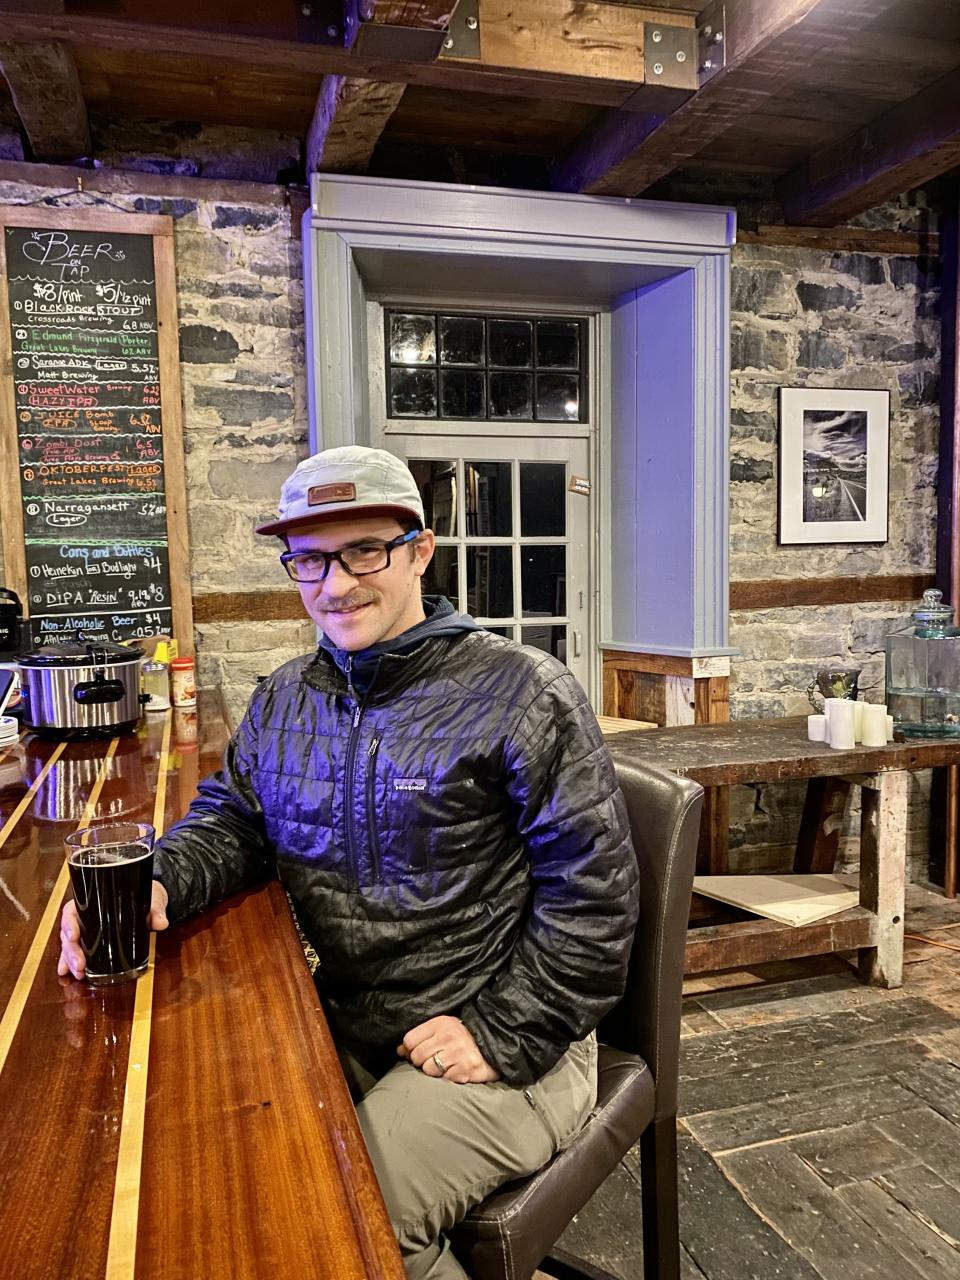 Man enjoying a beer at a bar in a rustic stone building.